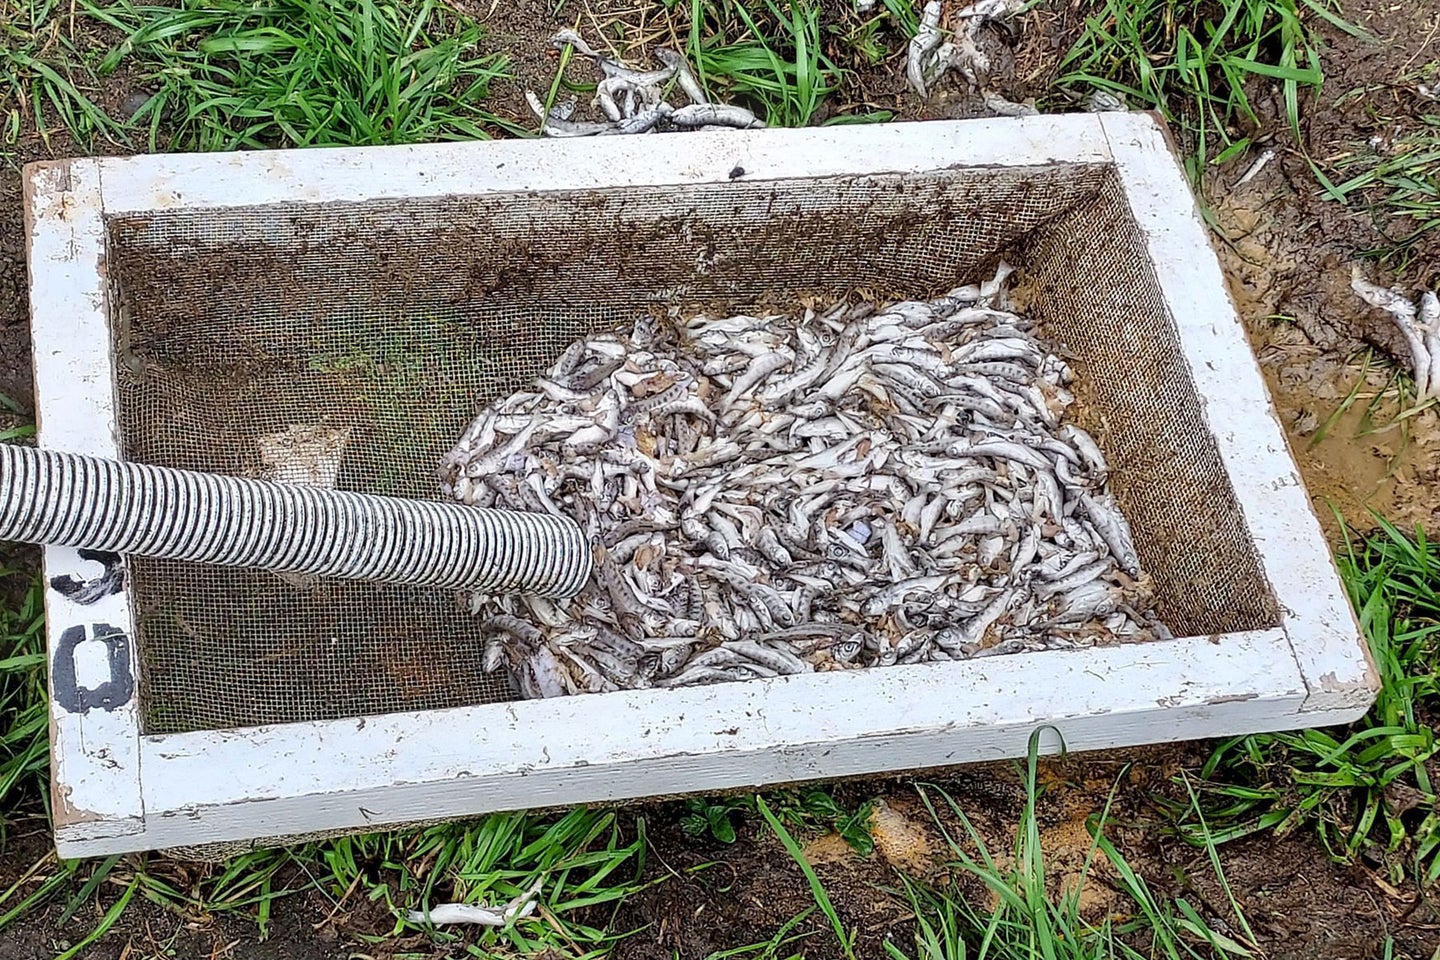 Juvenile salmon killed with bleach during break-in at Oregon hatchery.